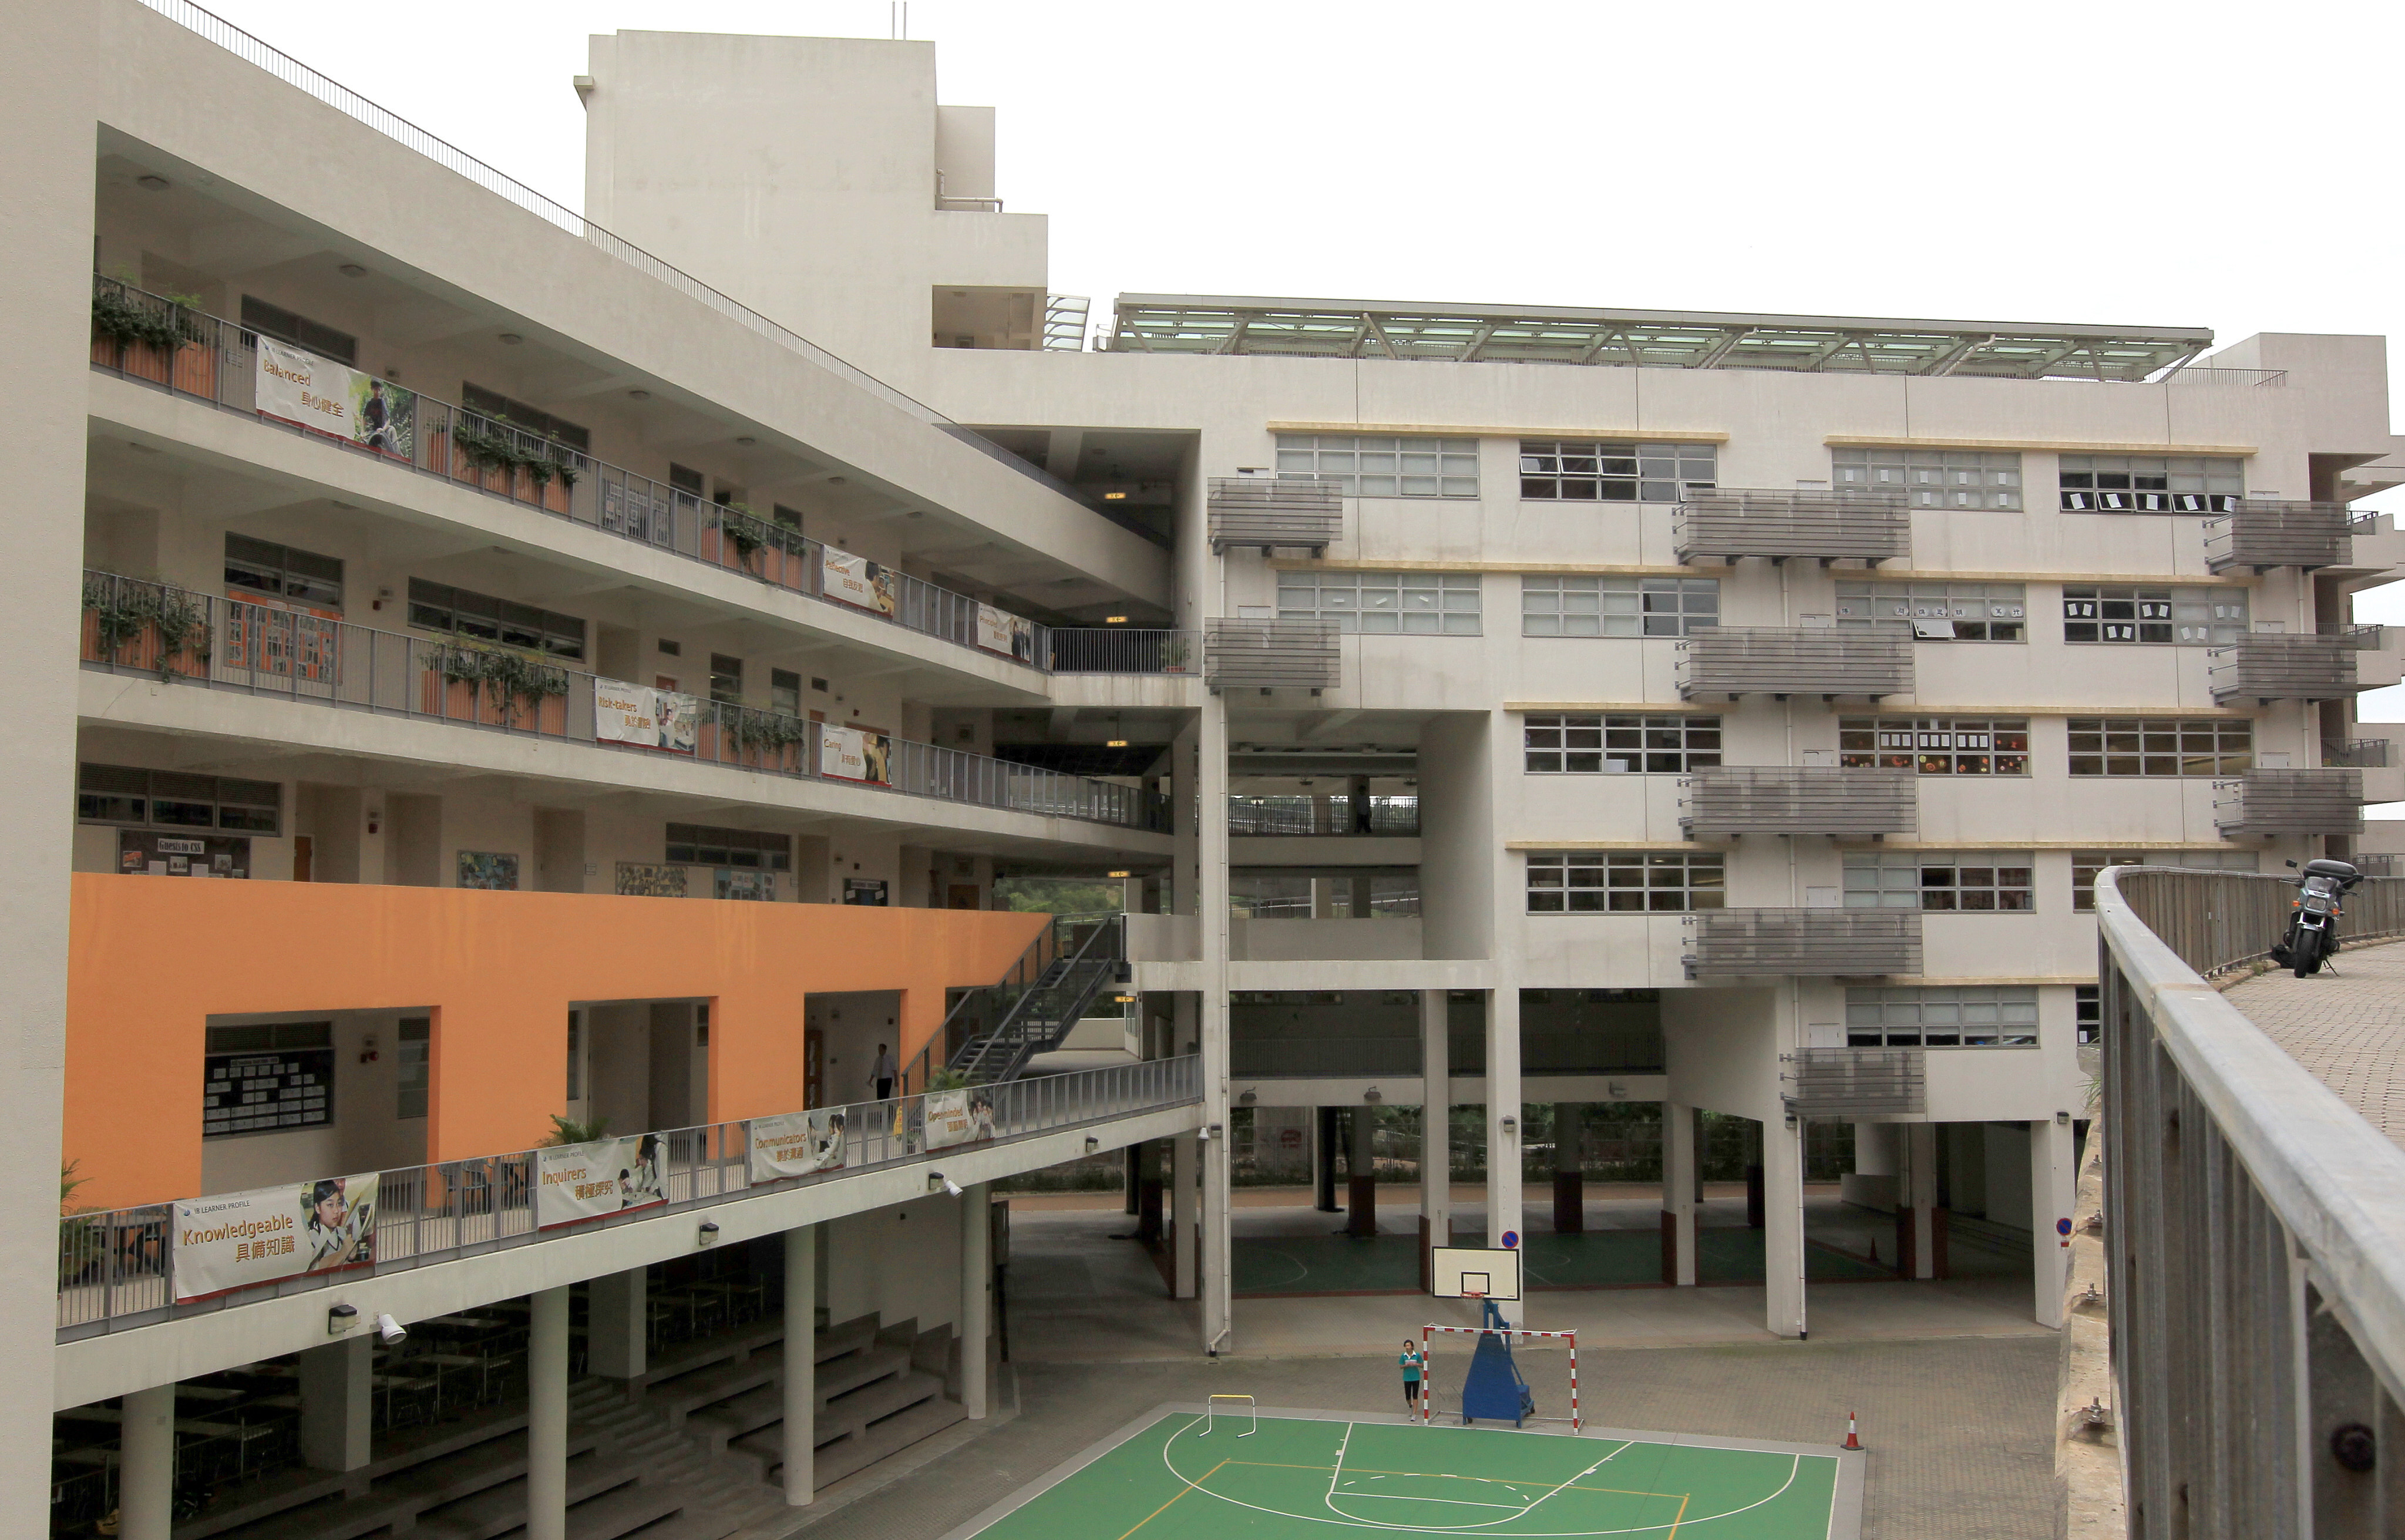 With the pandemic seeming to be on the retreat, many Hong Kong parents are making difficult decisions over their children’s education. Photo: SCMP